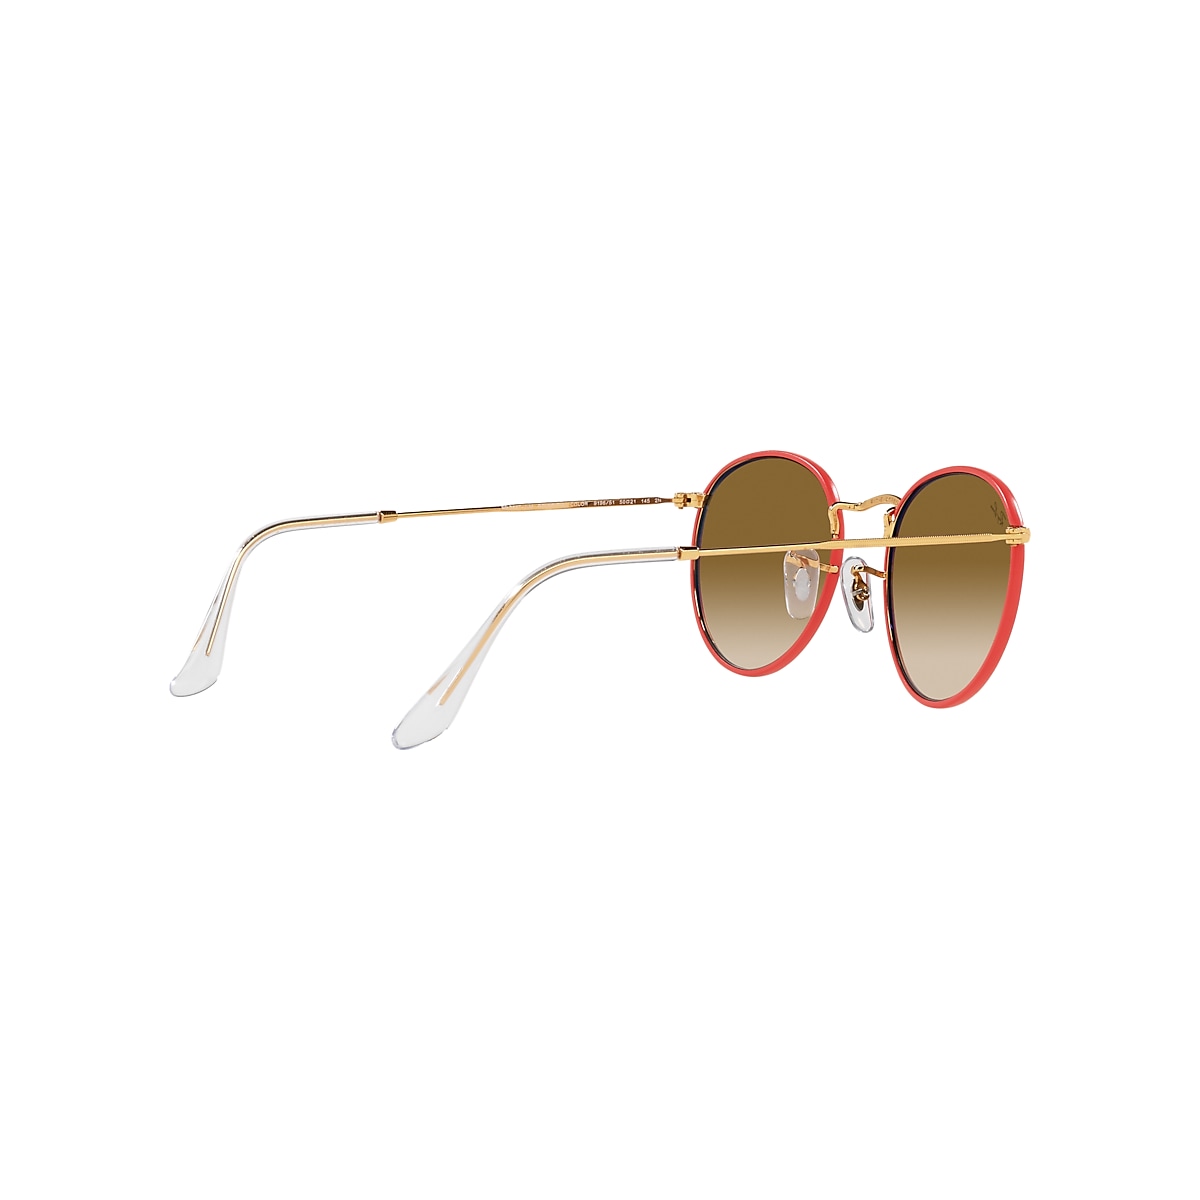 manipuleren Hesje herder Round Metal Full Color Legend Sunglasses in Red and Light Brown | Ray-Ban®